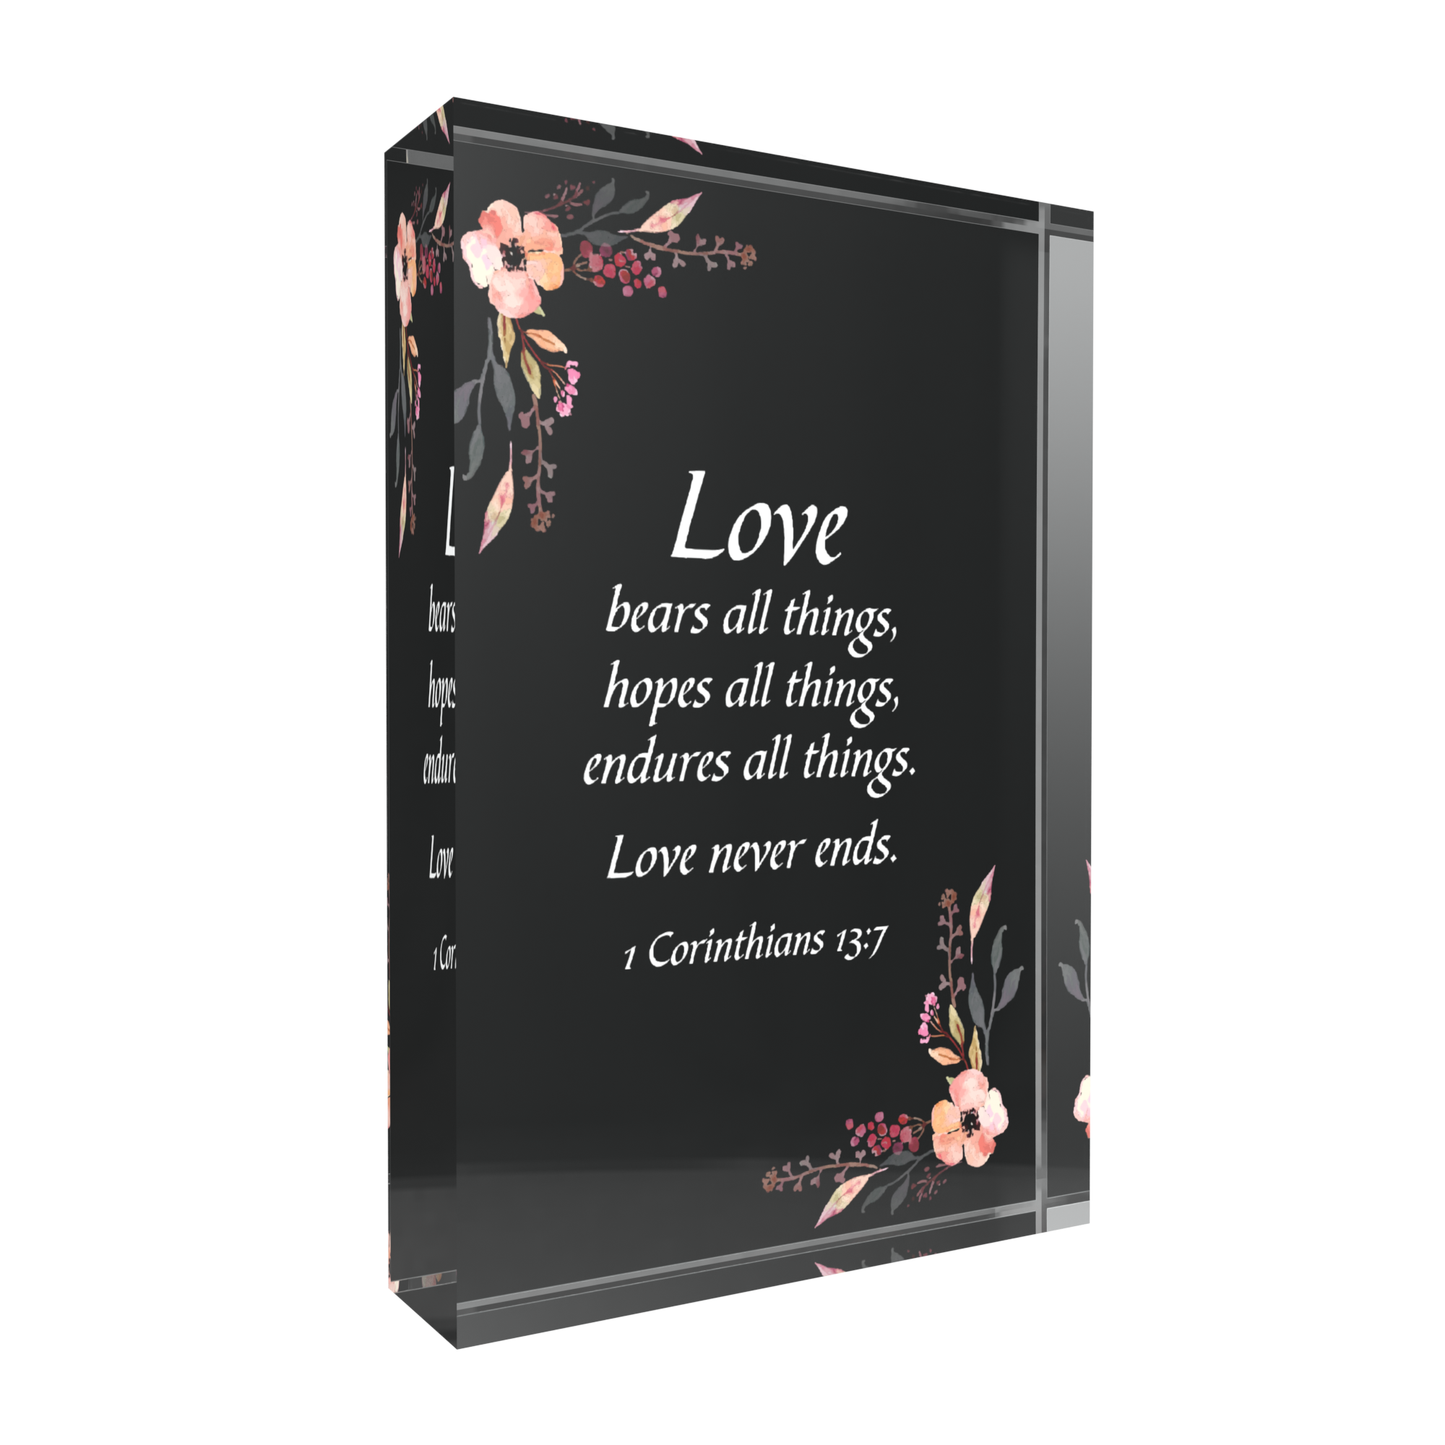 Inspirational Lucite Plaque - Love Bears All Things